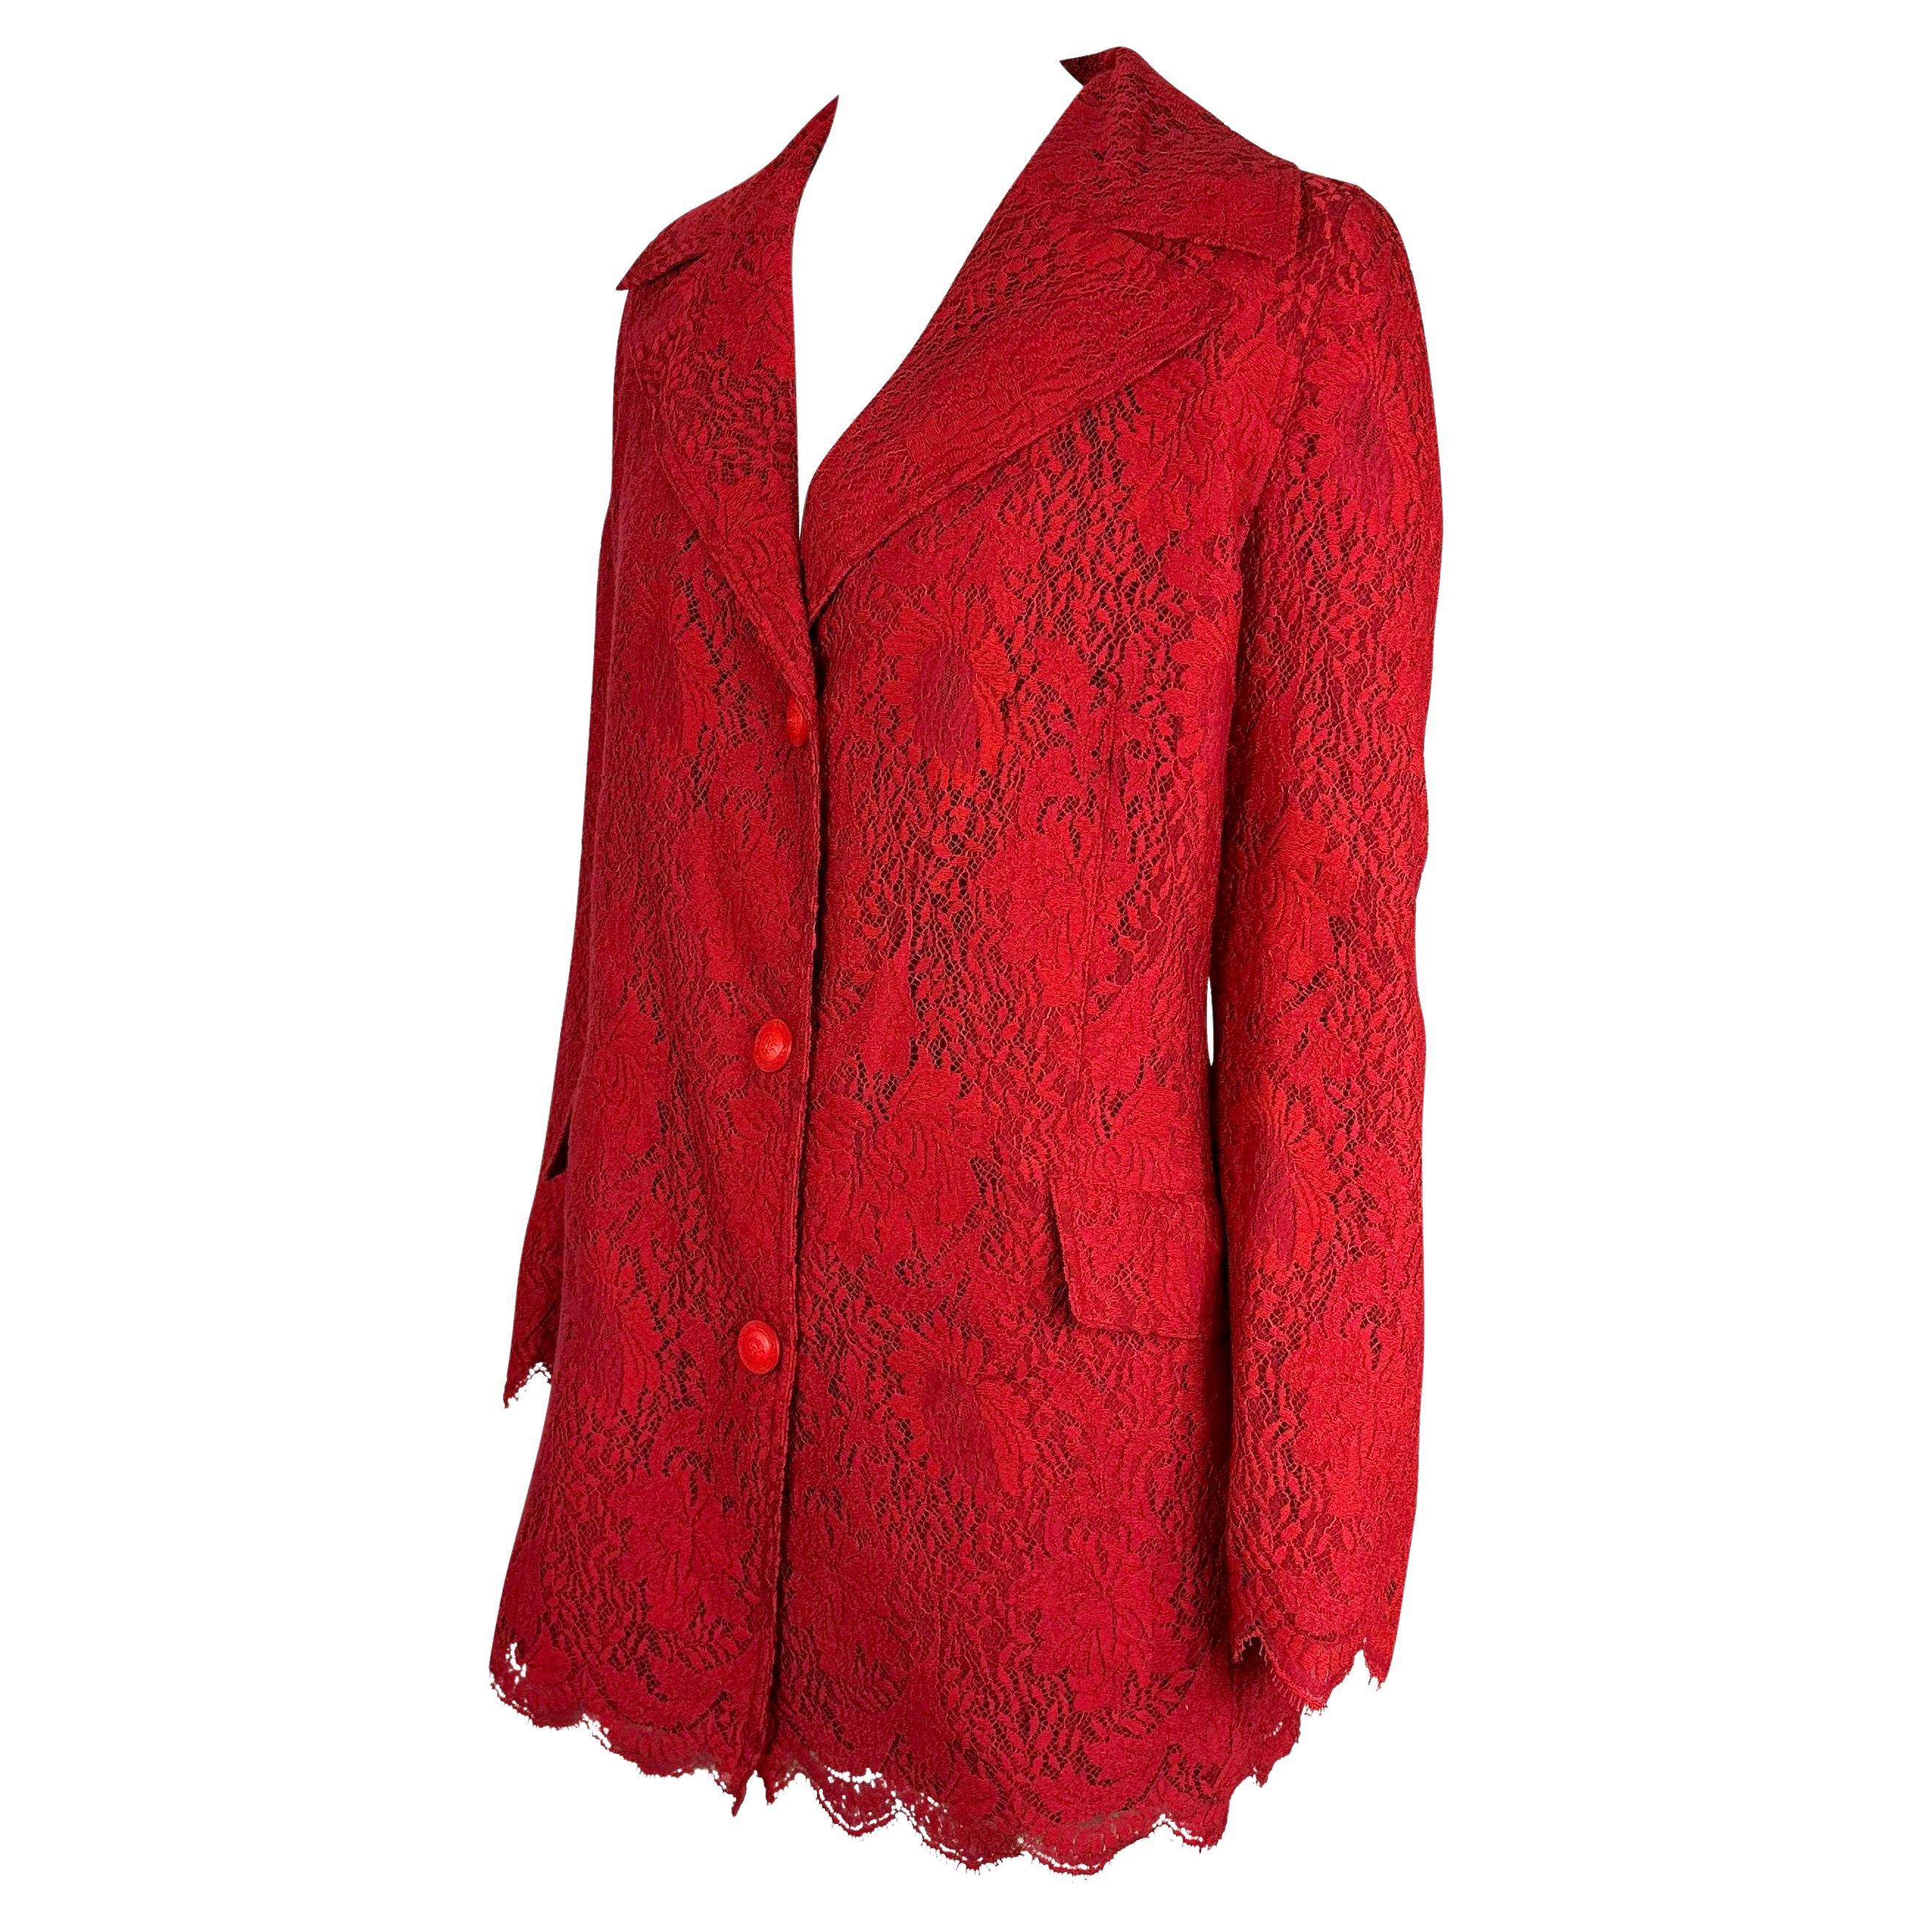 Presenting a fabulous red lace oversized Gianni Versace coat, designed by Gianni Versace. From 1996, this coat is constructed entirely of floral red lace and features a wide lapel, scalloped lace finishes at the hem, and is made complete with red